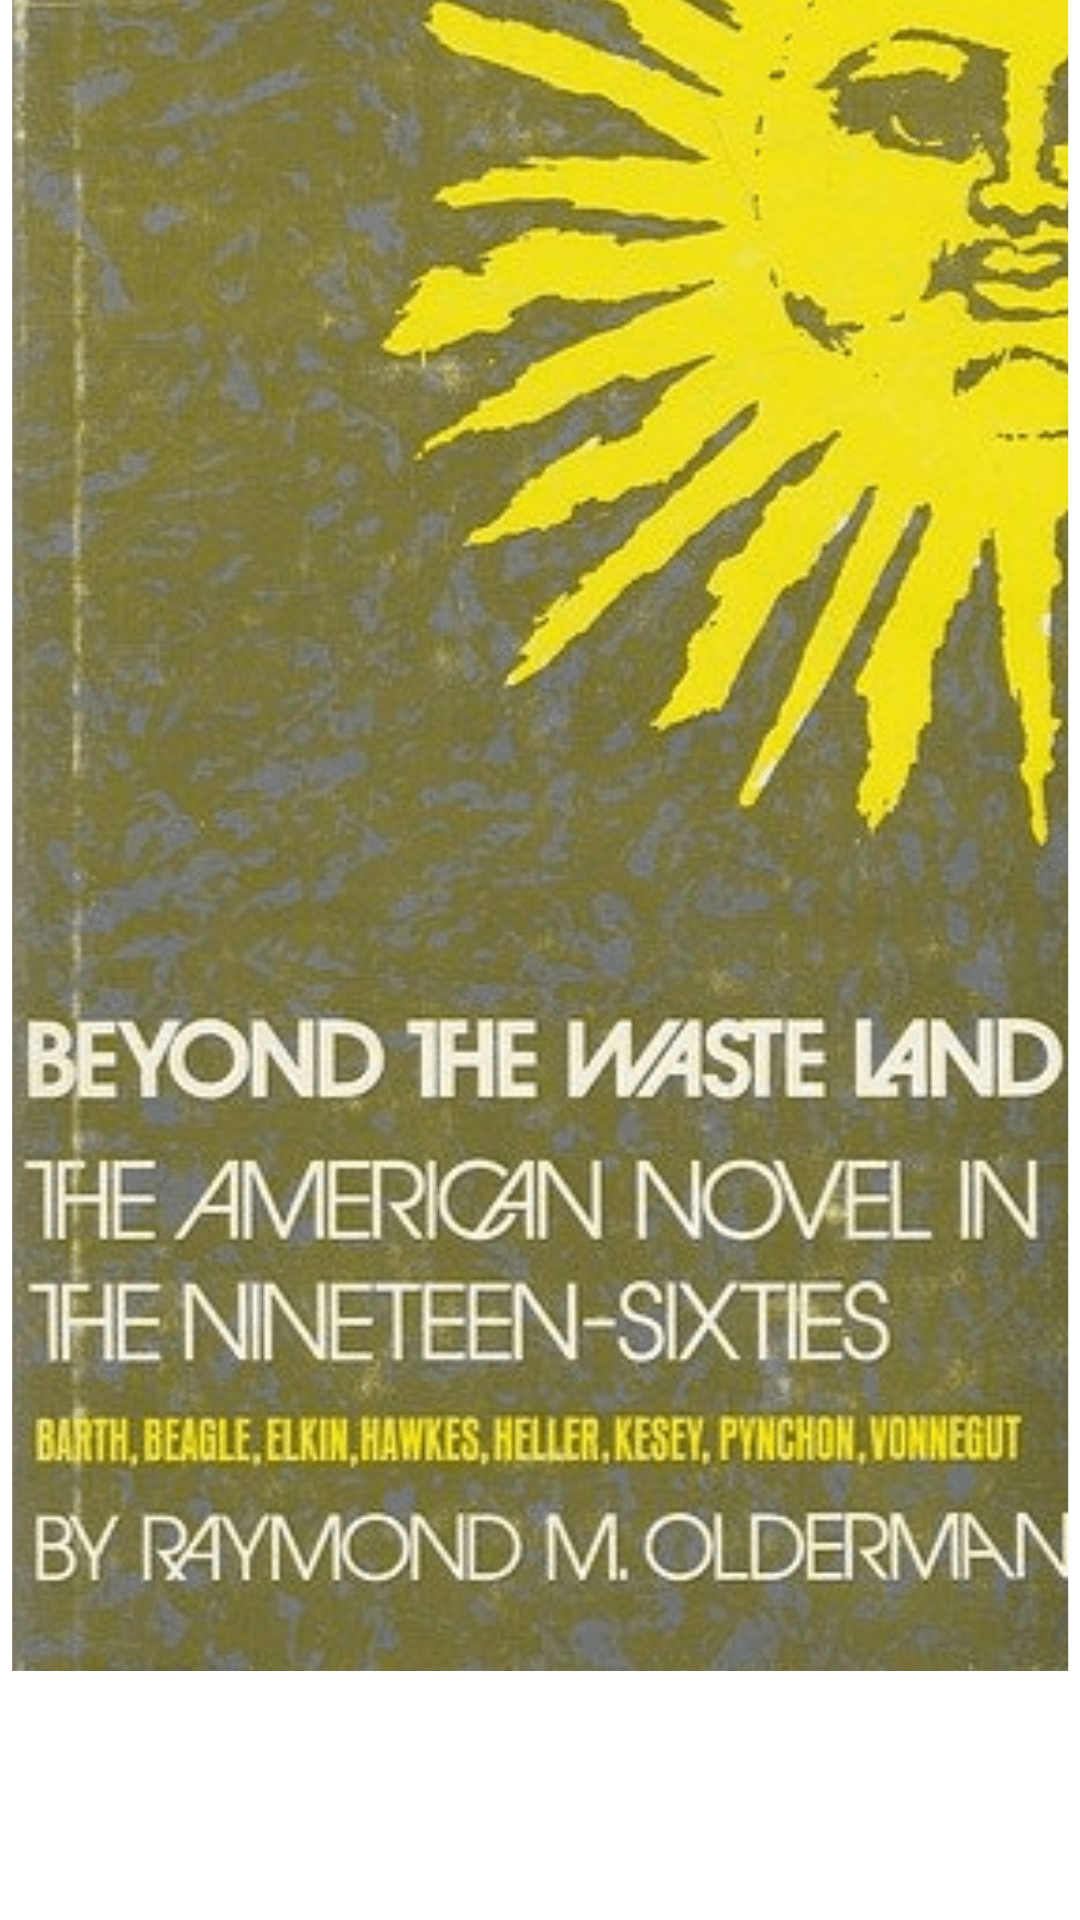 Beyond the waste land: A study of the American novel in the nineteen-sixties,